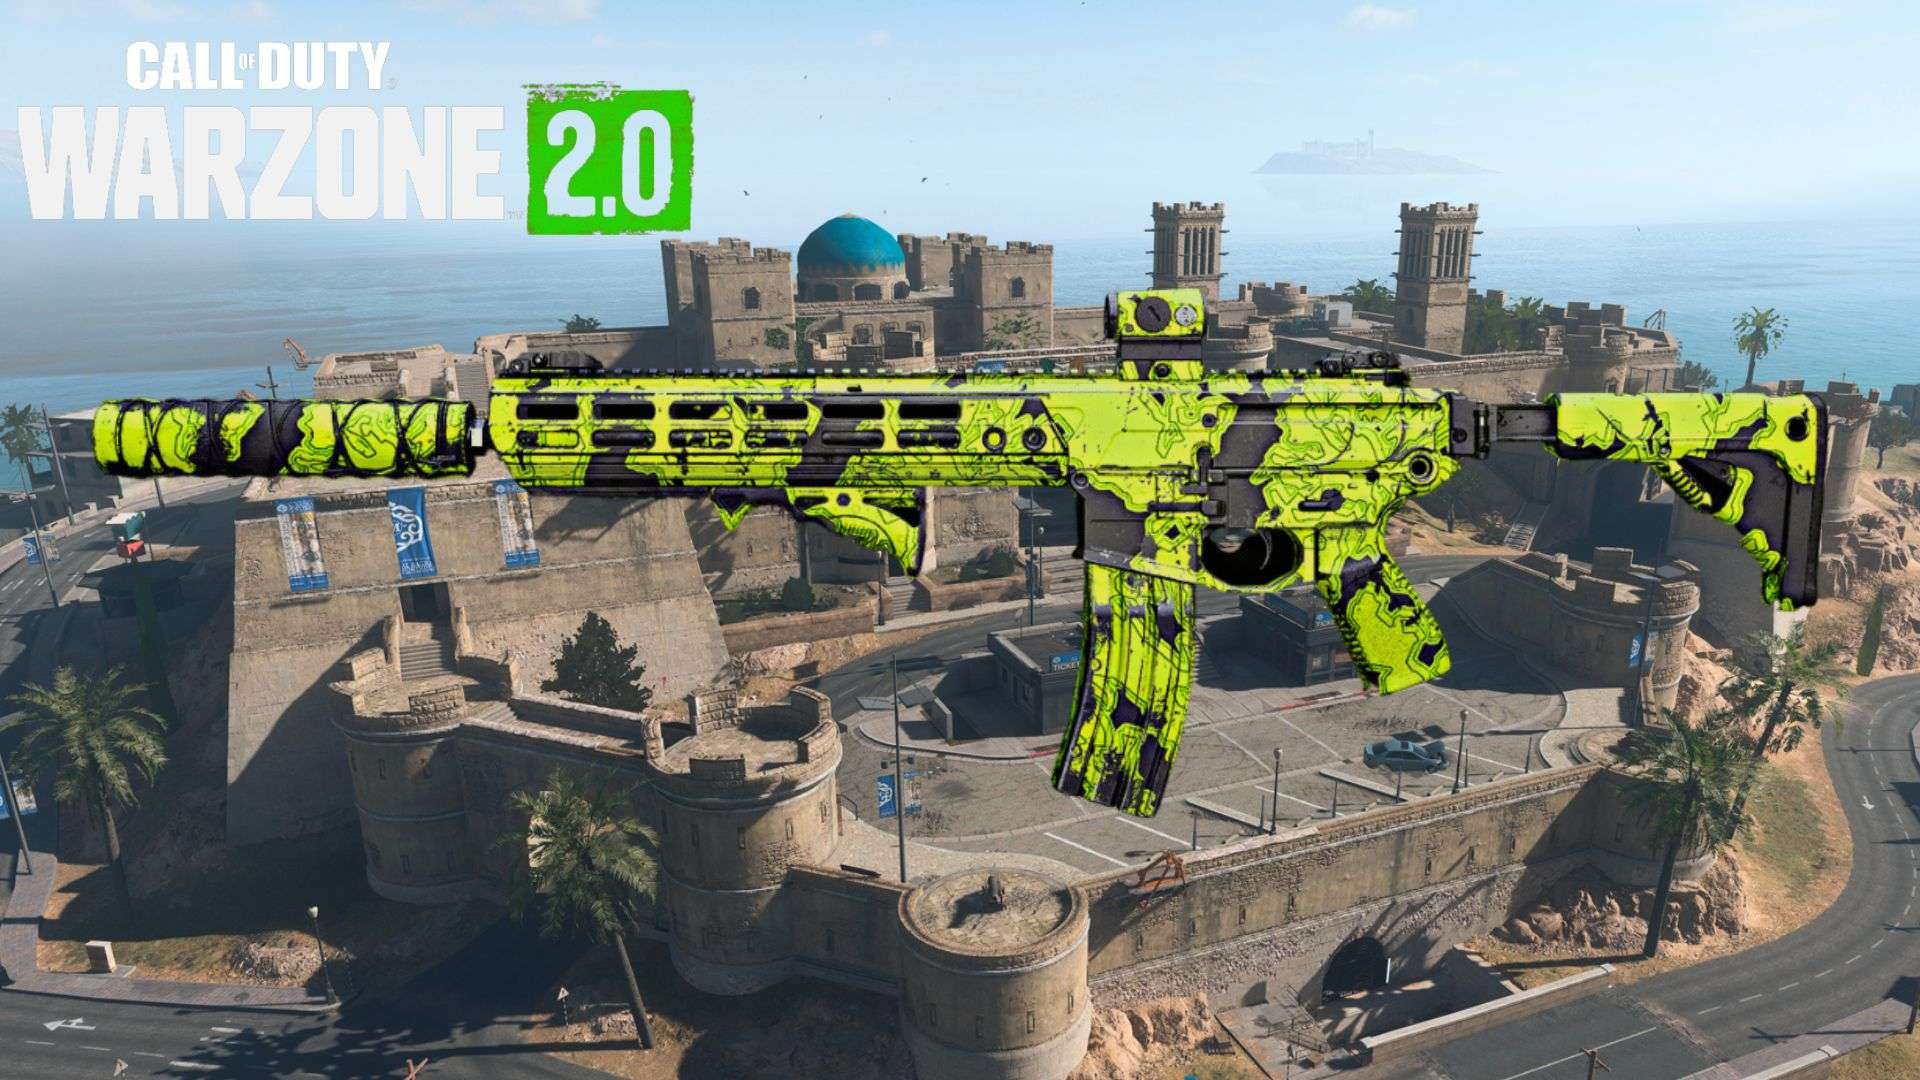 M13B assault rifle in green skin in warzone 2